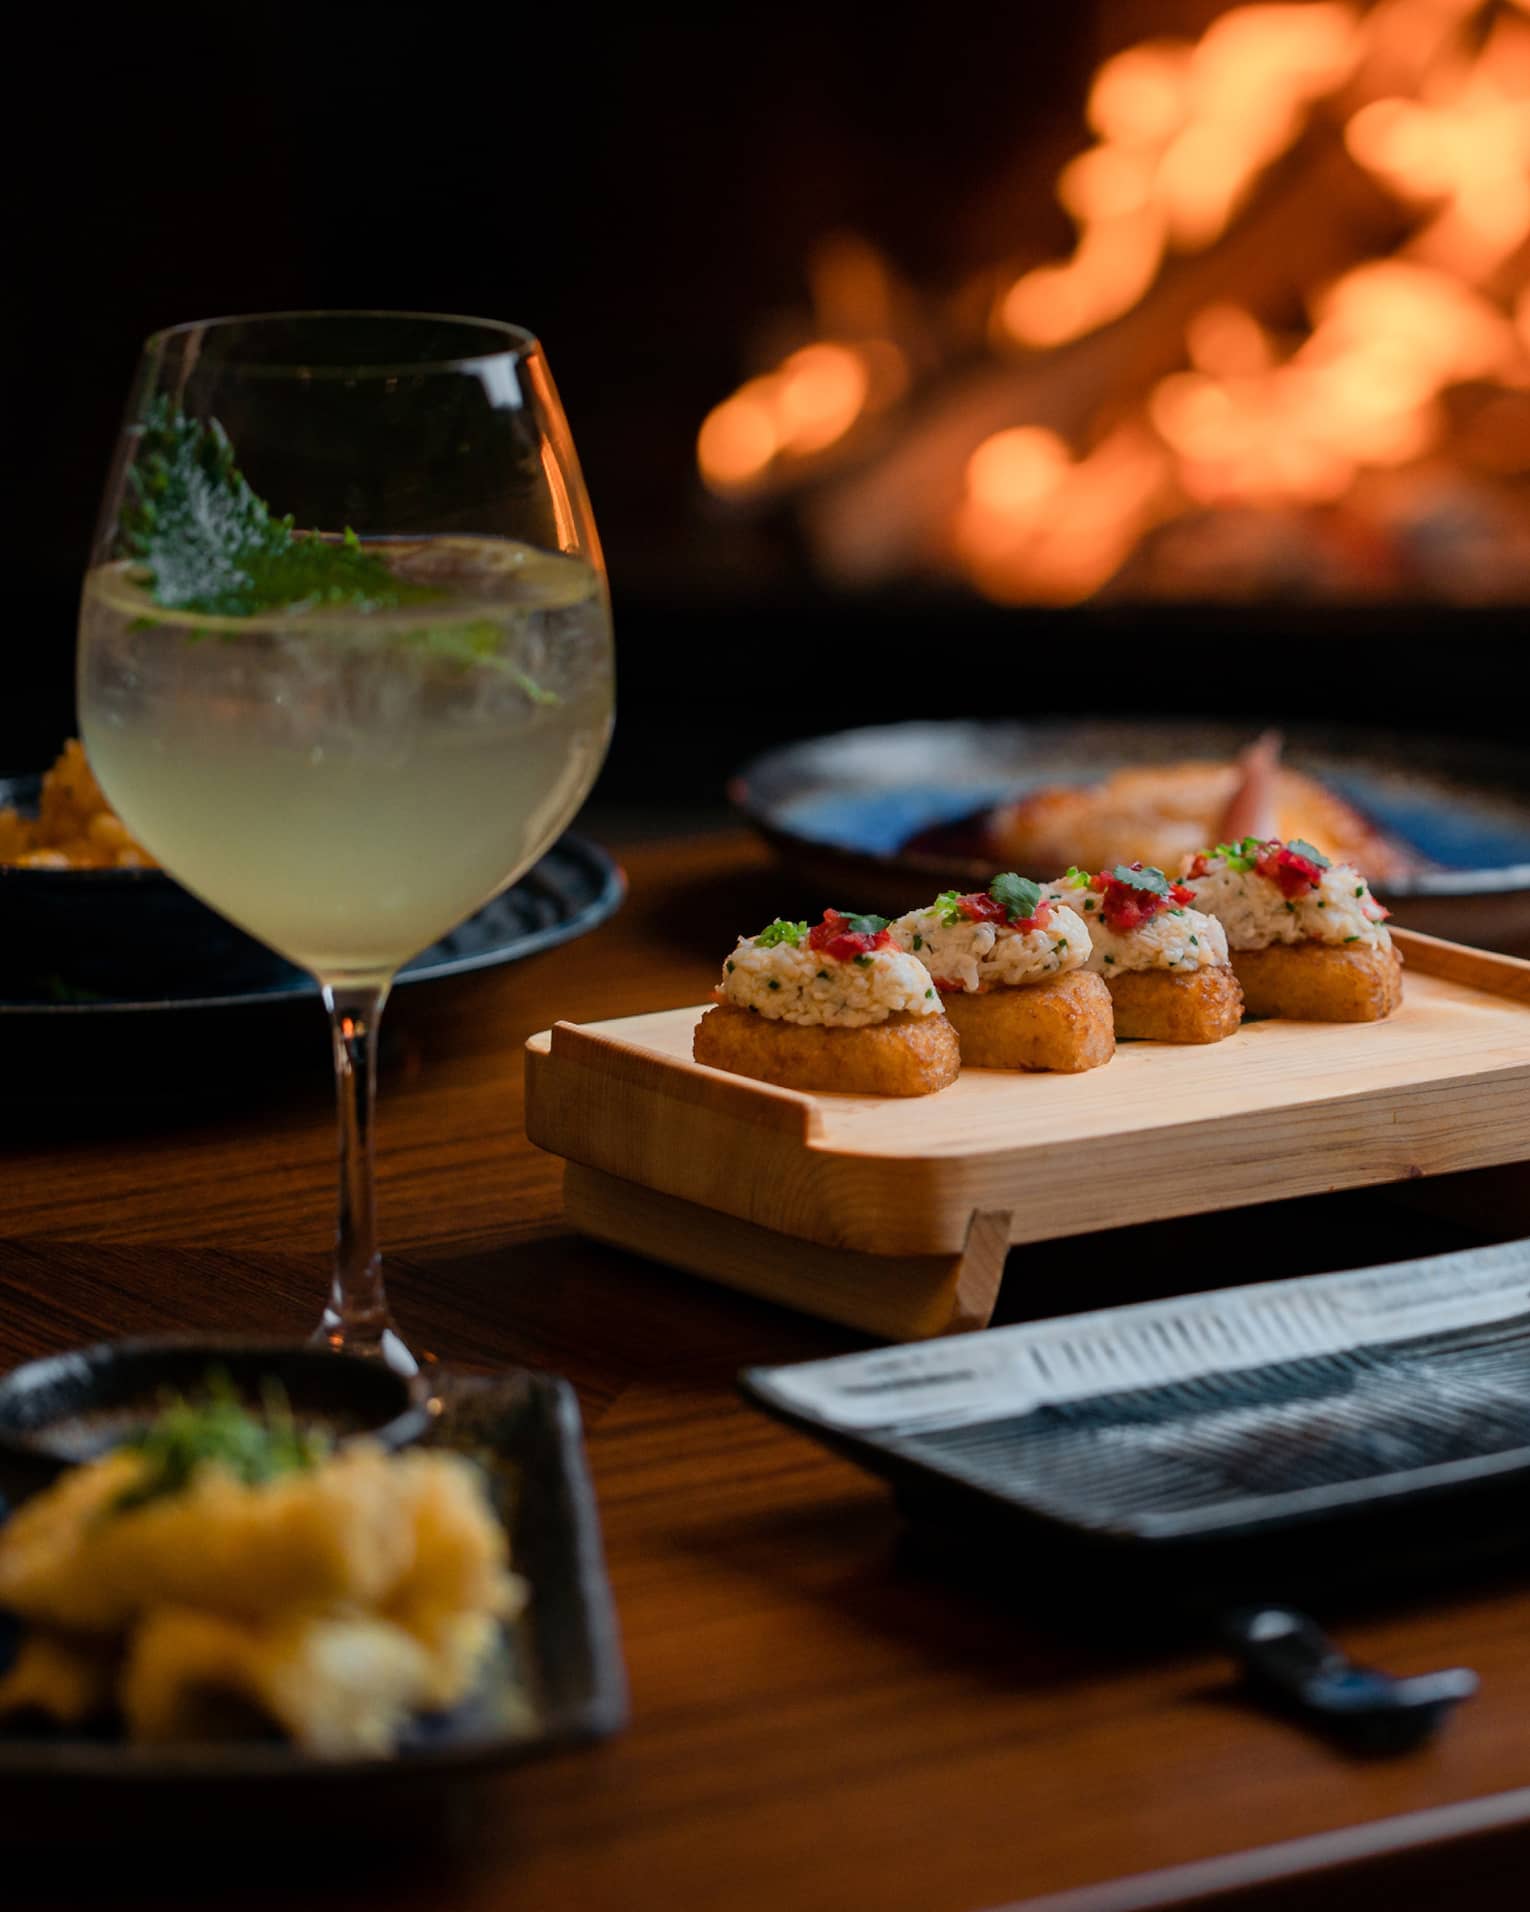 Sushi dinner setup on table with glass of white wine and sparkling fire in backdrop